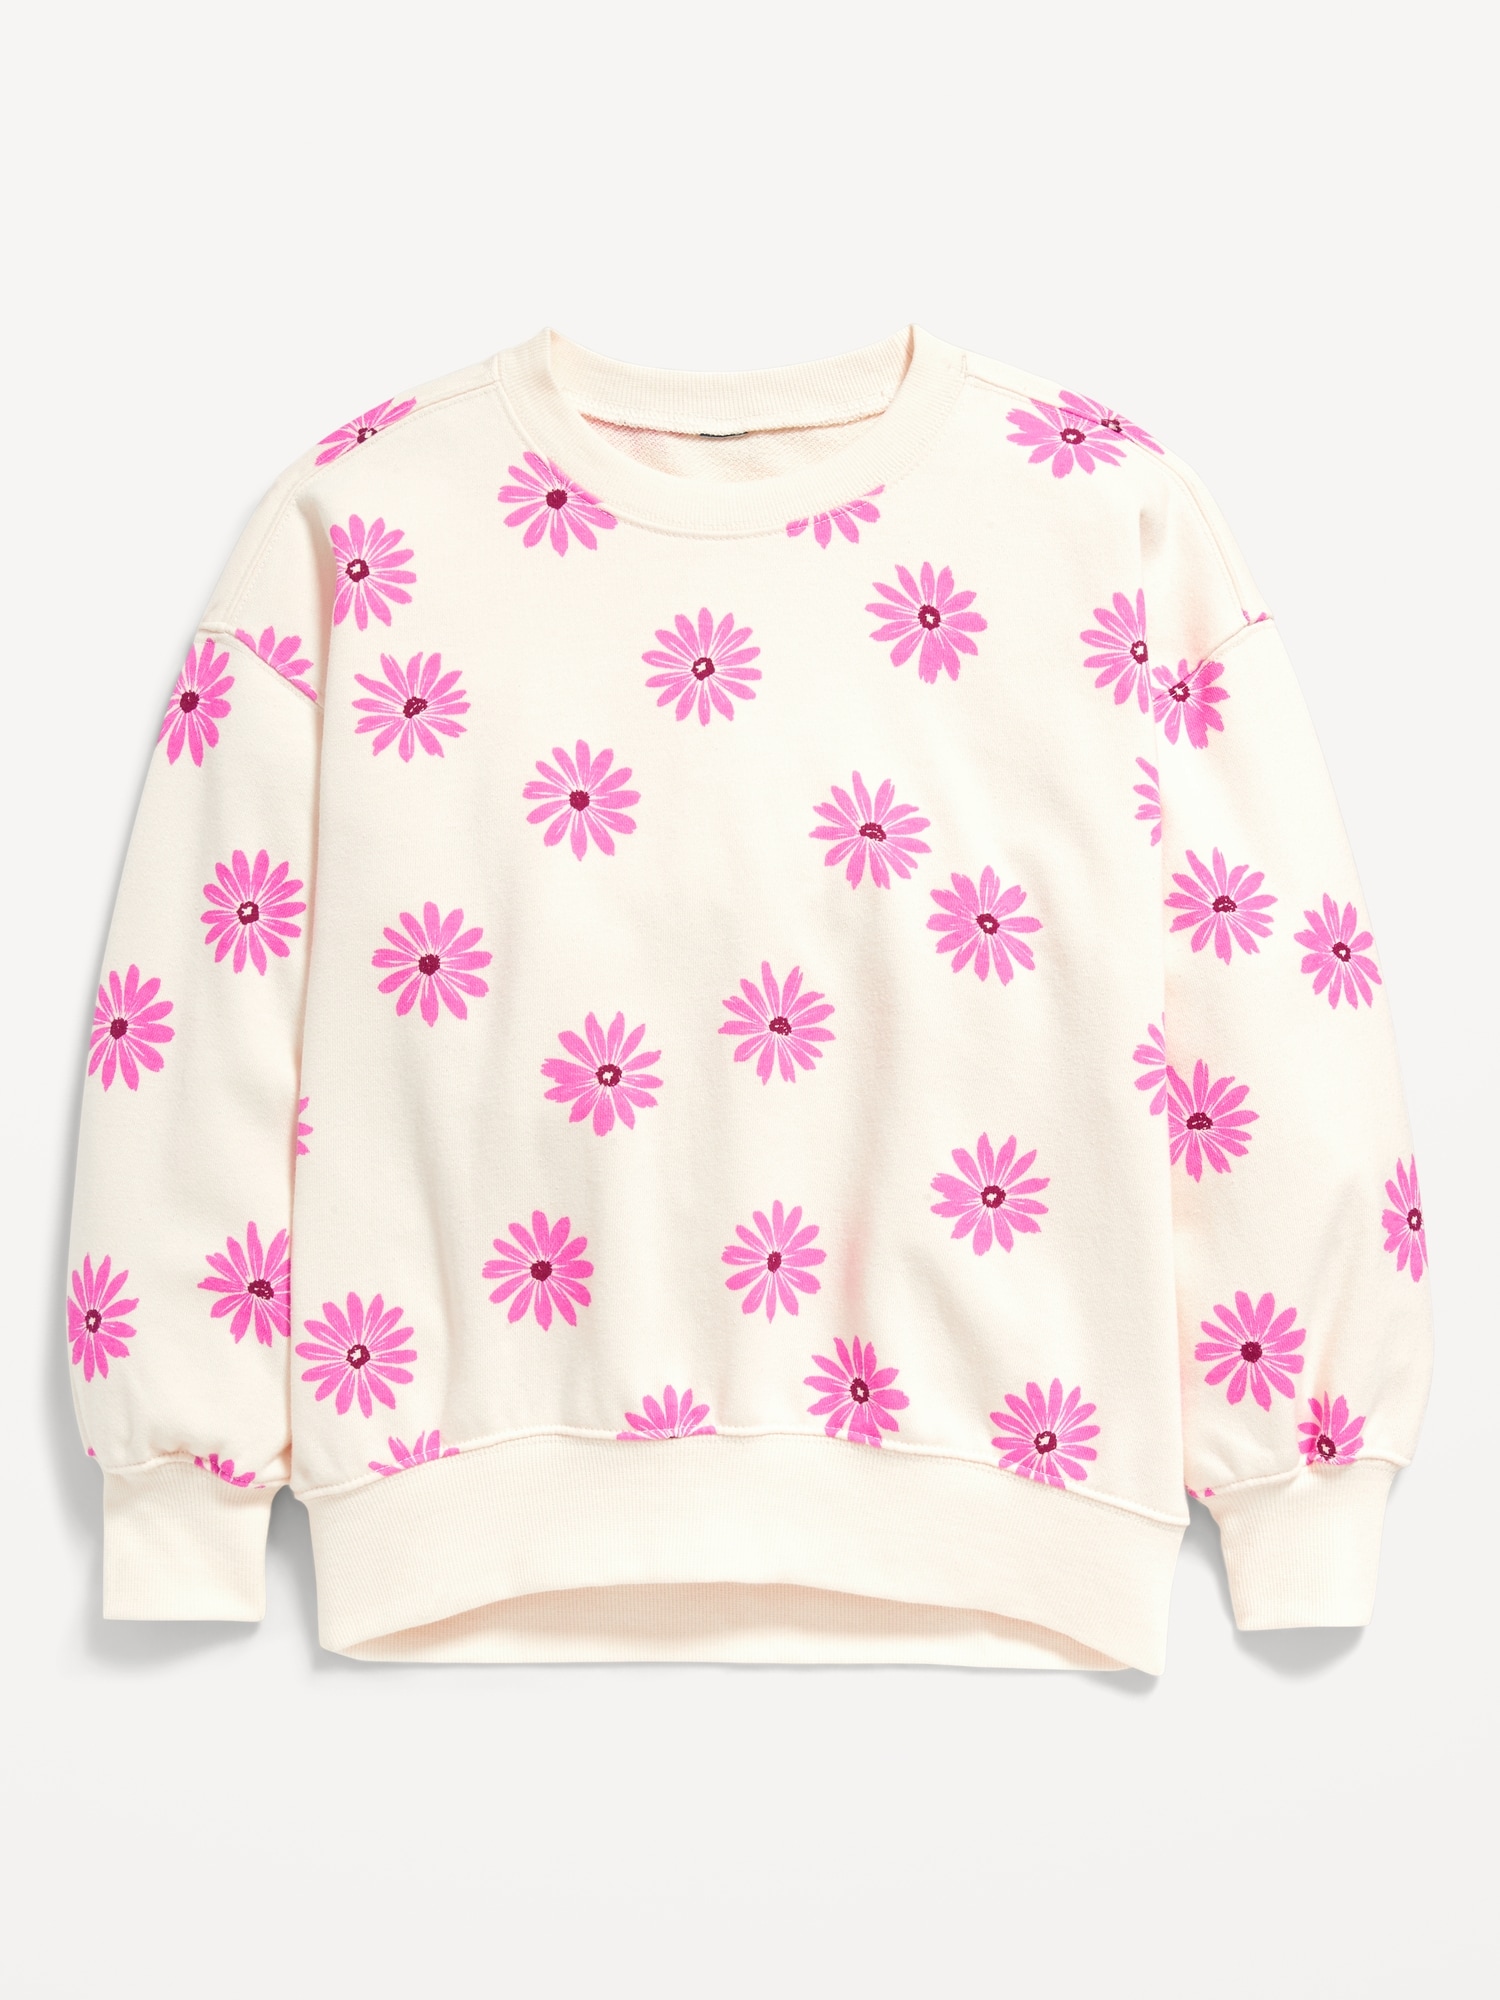 Slouchy Crew Neck Graphic Sweatshirt for Girls | Old Navy